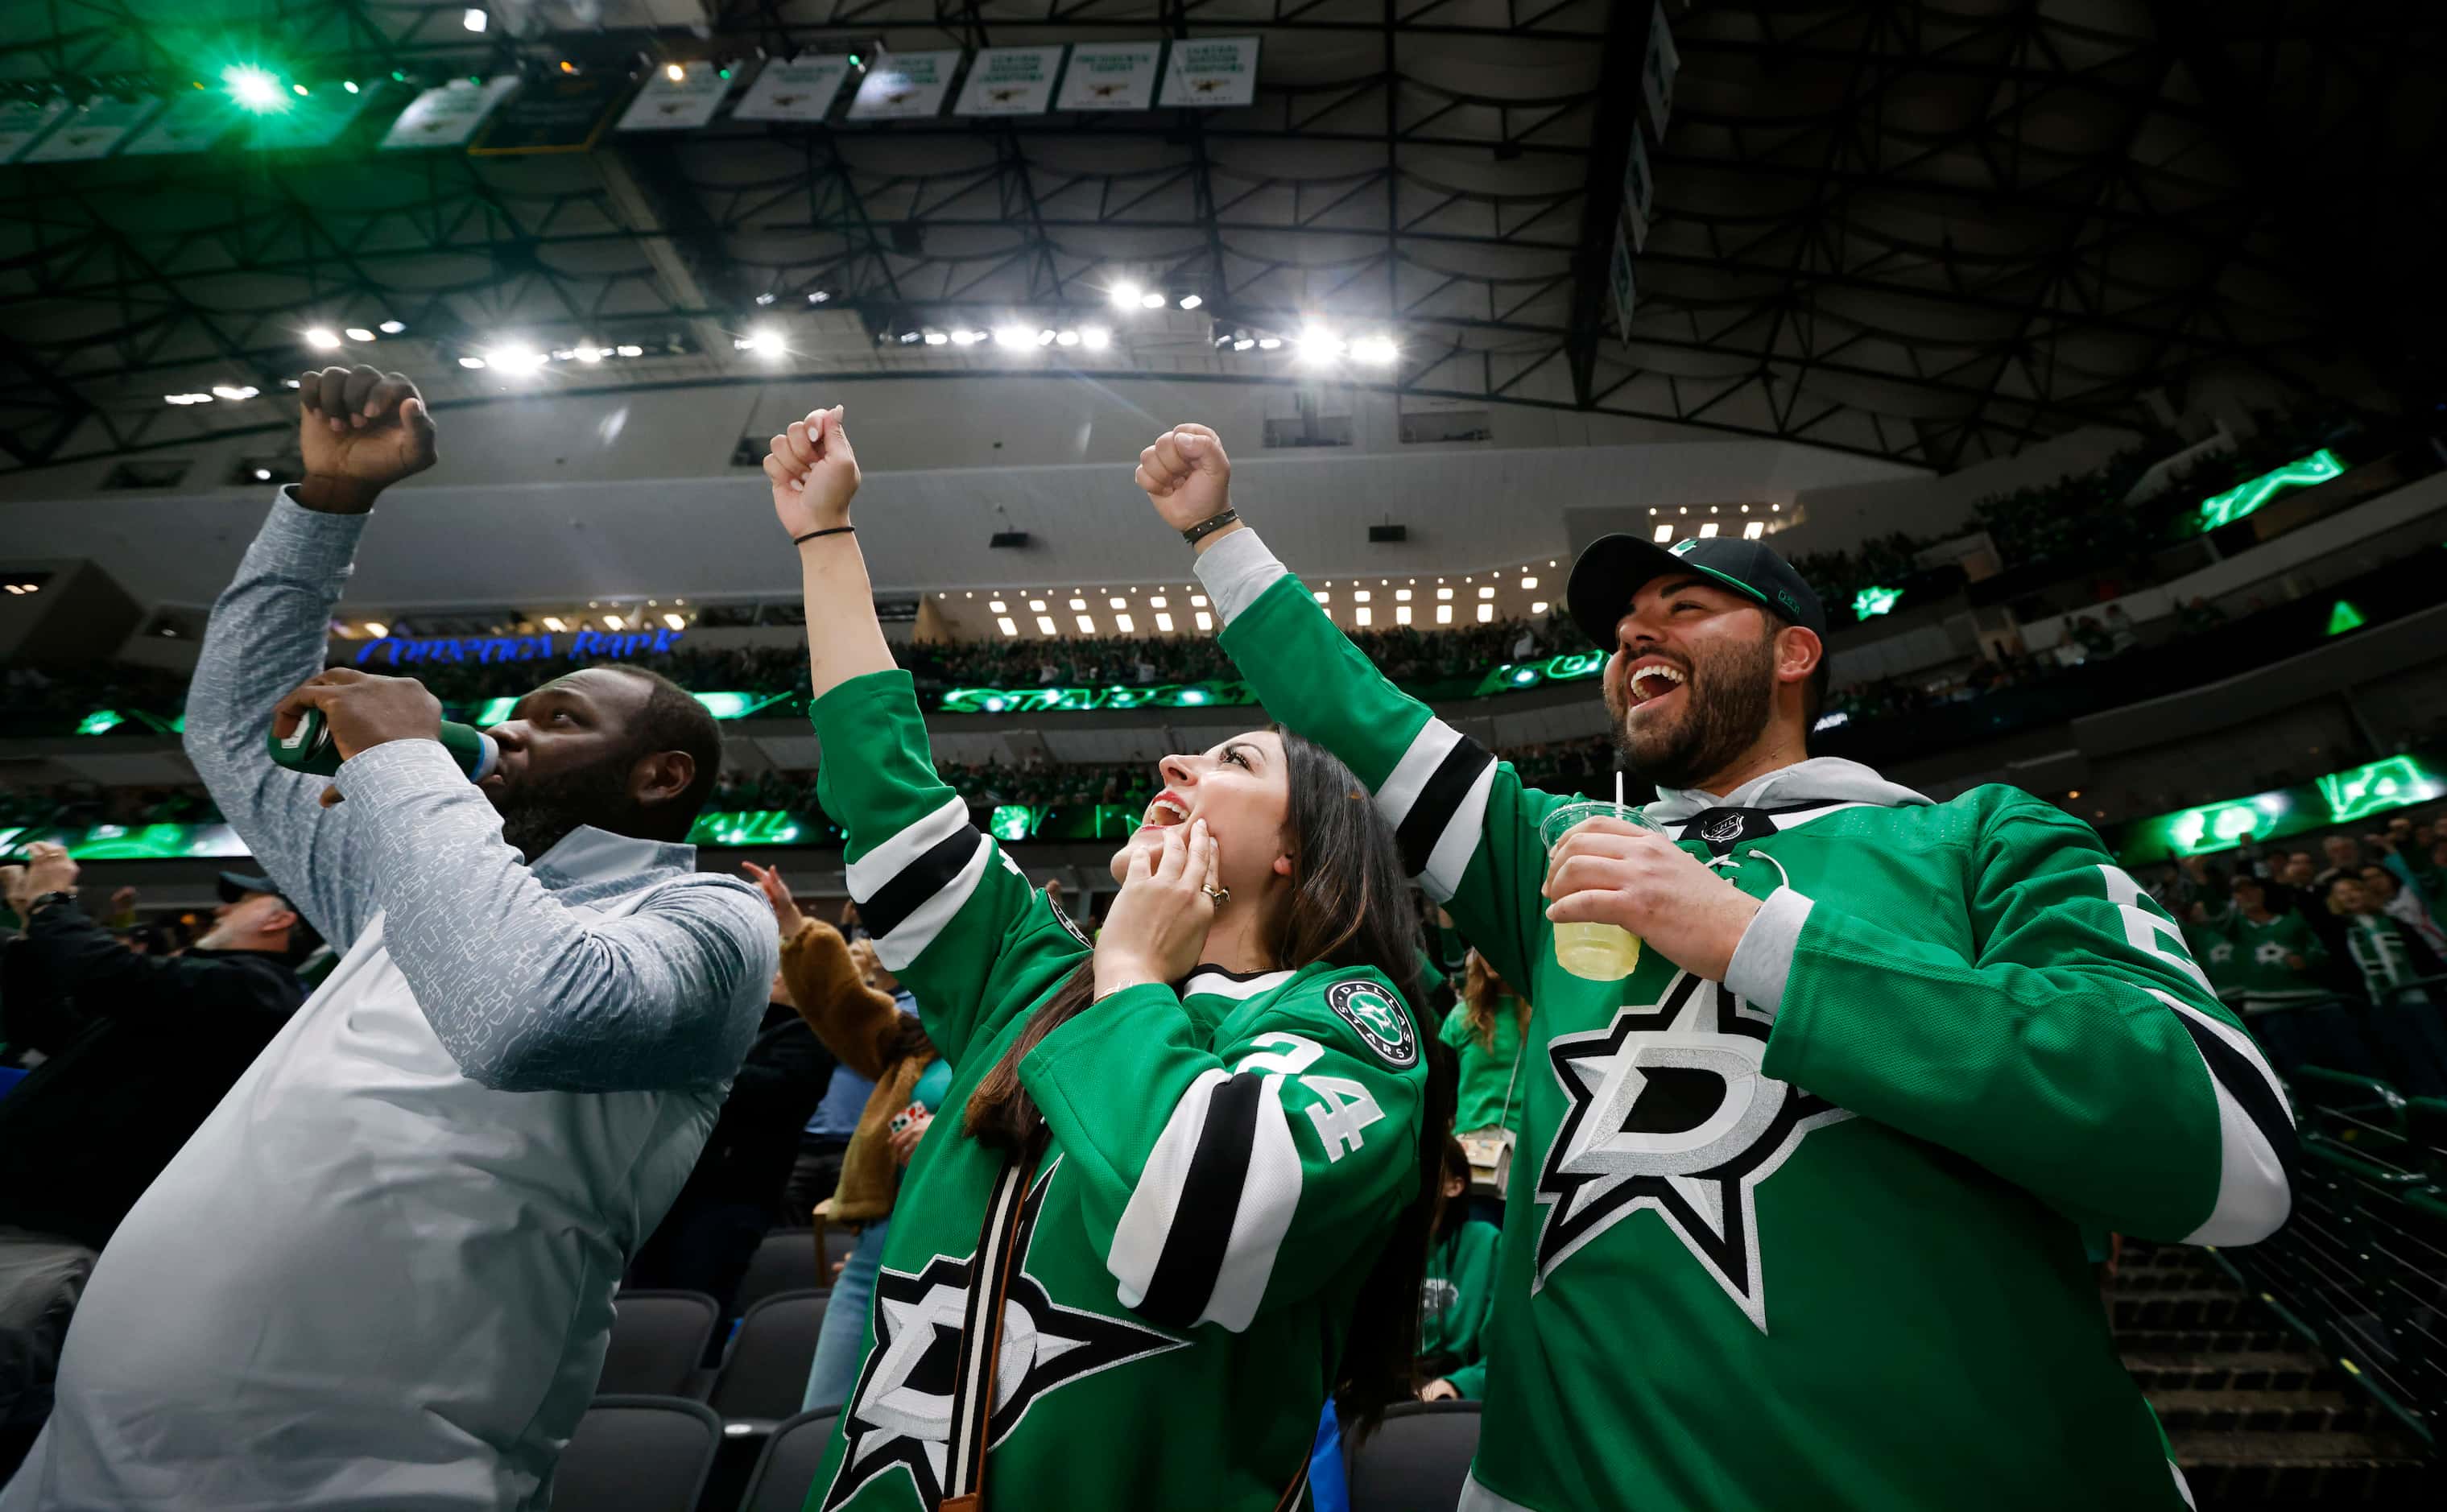 (From left) Michael Aalonia, April McEuen, and David Brooks, all from Dallas, cheer a...